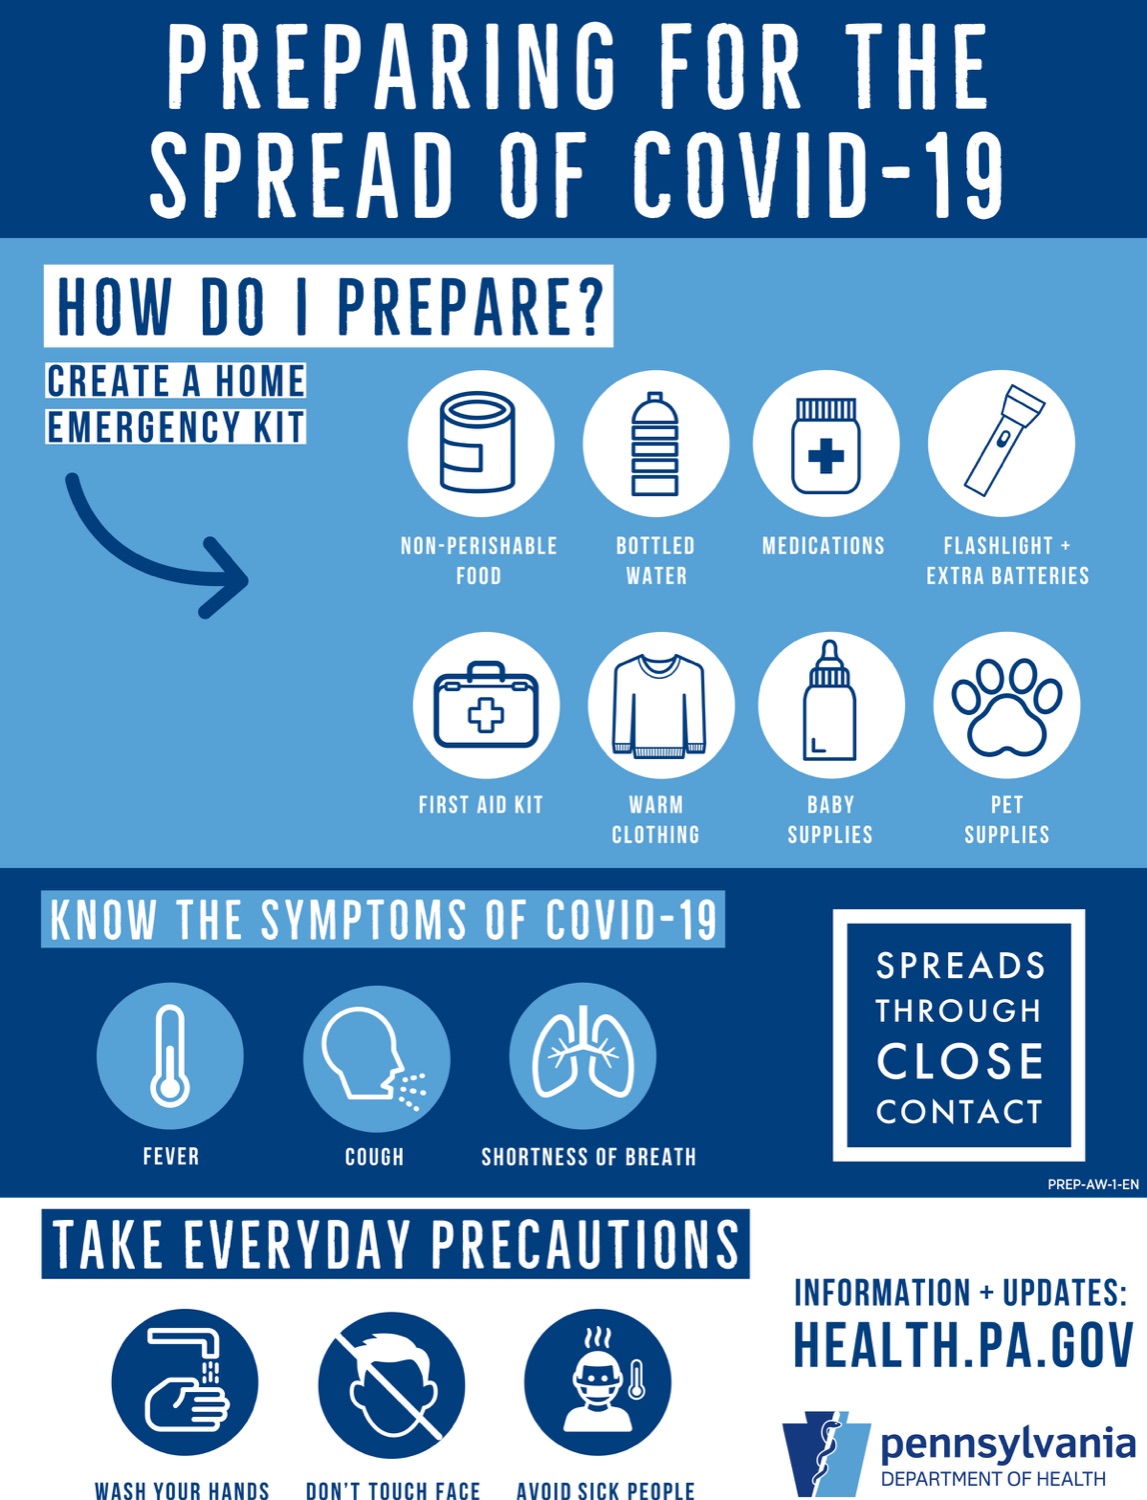 Covid-19 Outreach: Print Poster<br><a href="https://filesource.amperwave.net/commonwealthofpa/photo/17885_newspaper_PREP-AW-2_EN.jpg" target="_blank">⇣ Download Photo</a>